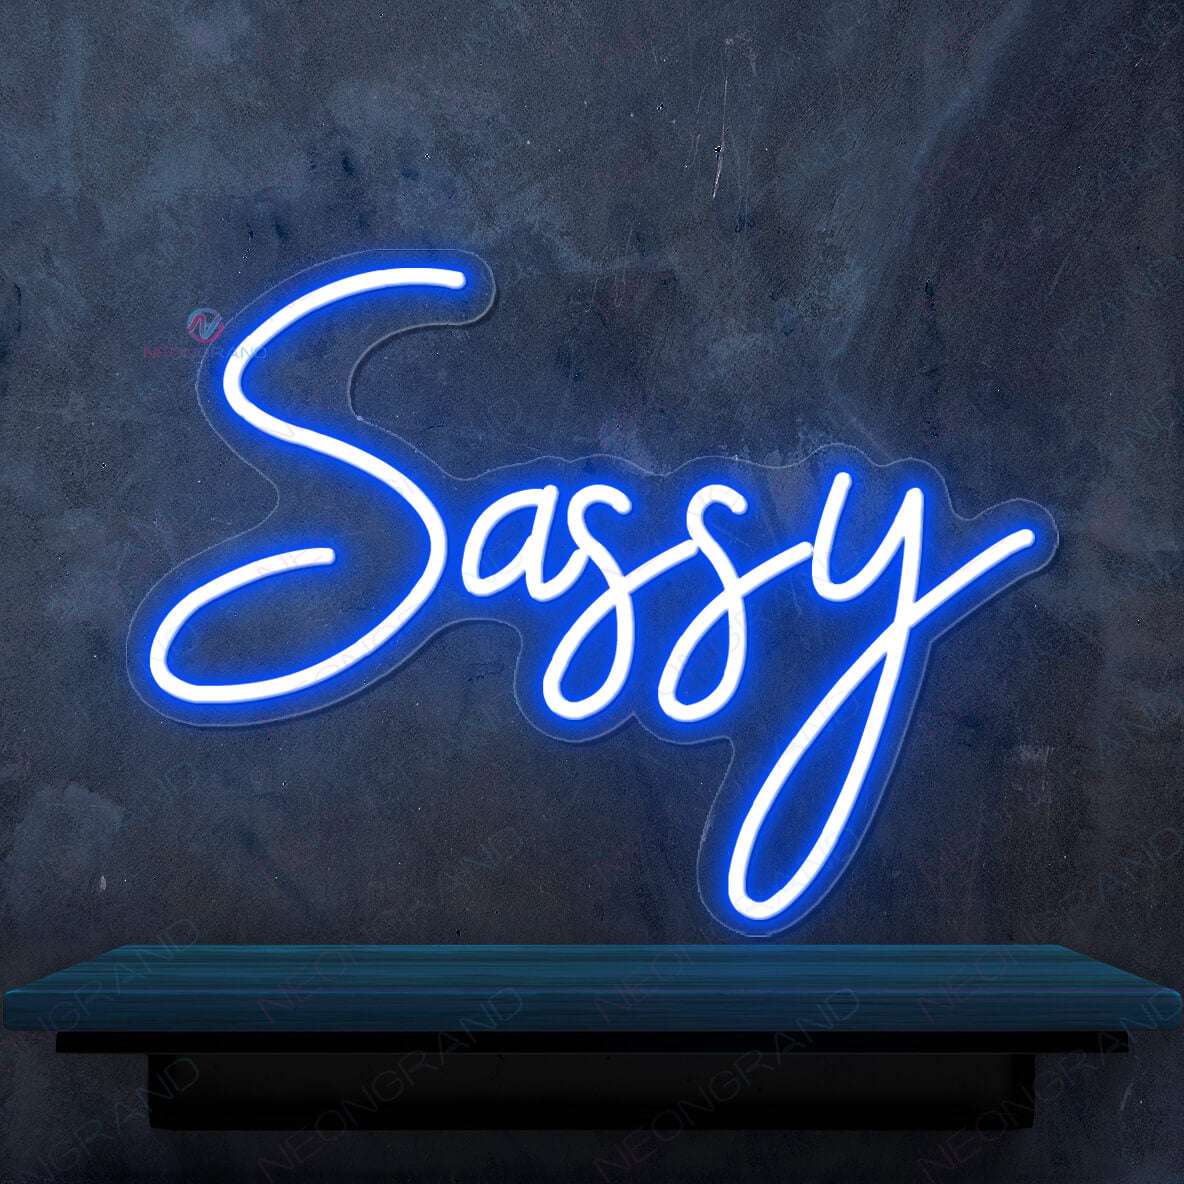 Sassy Neon Sign Stay Sassy Neon Party Led Light blue